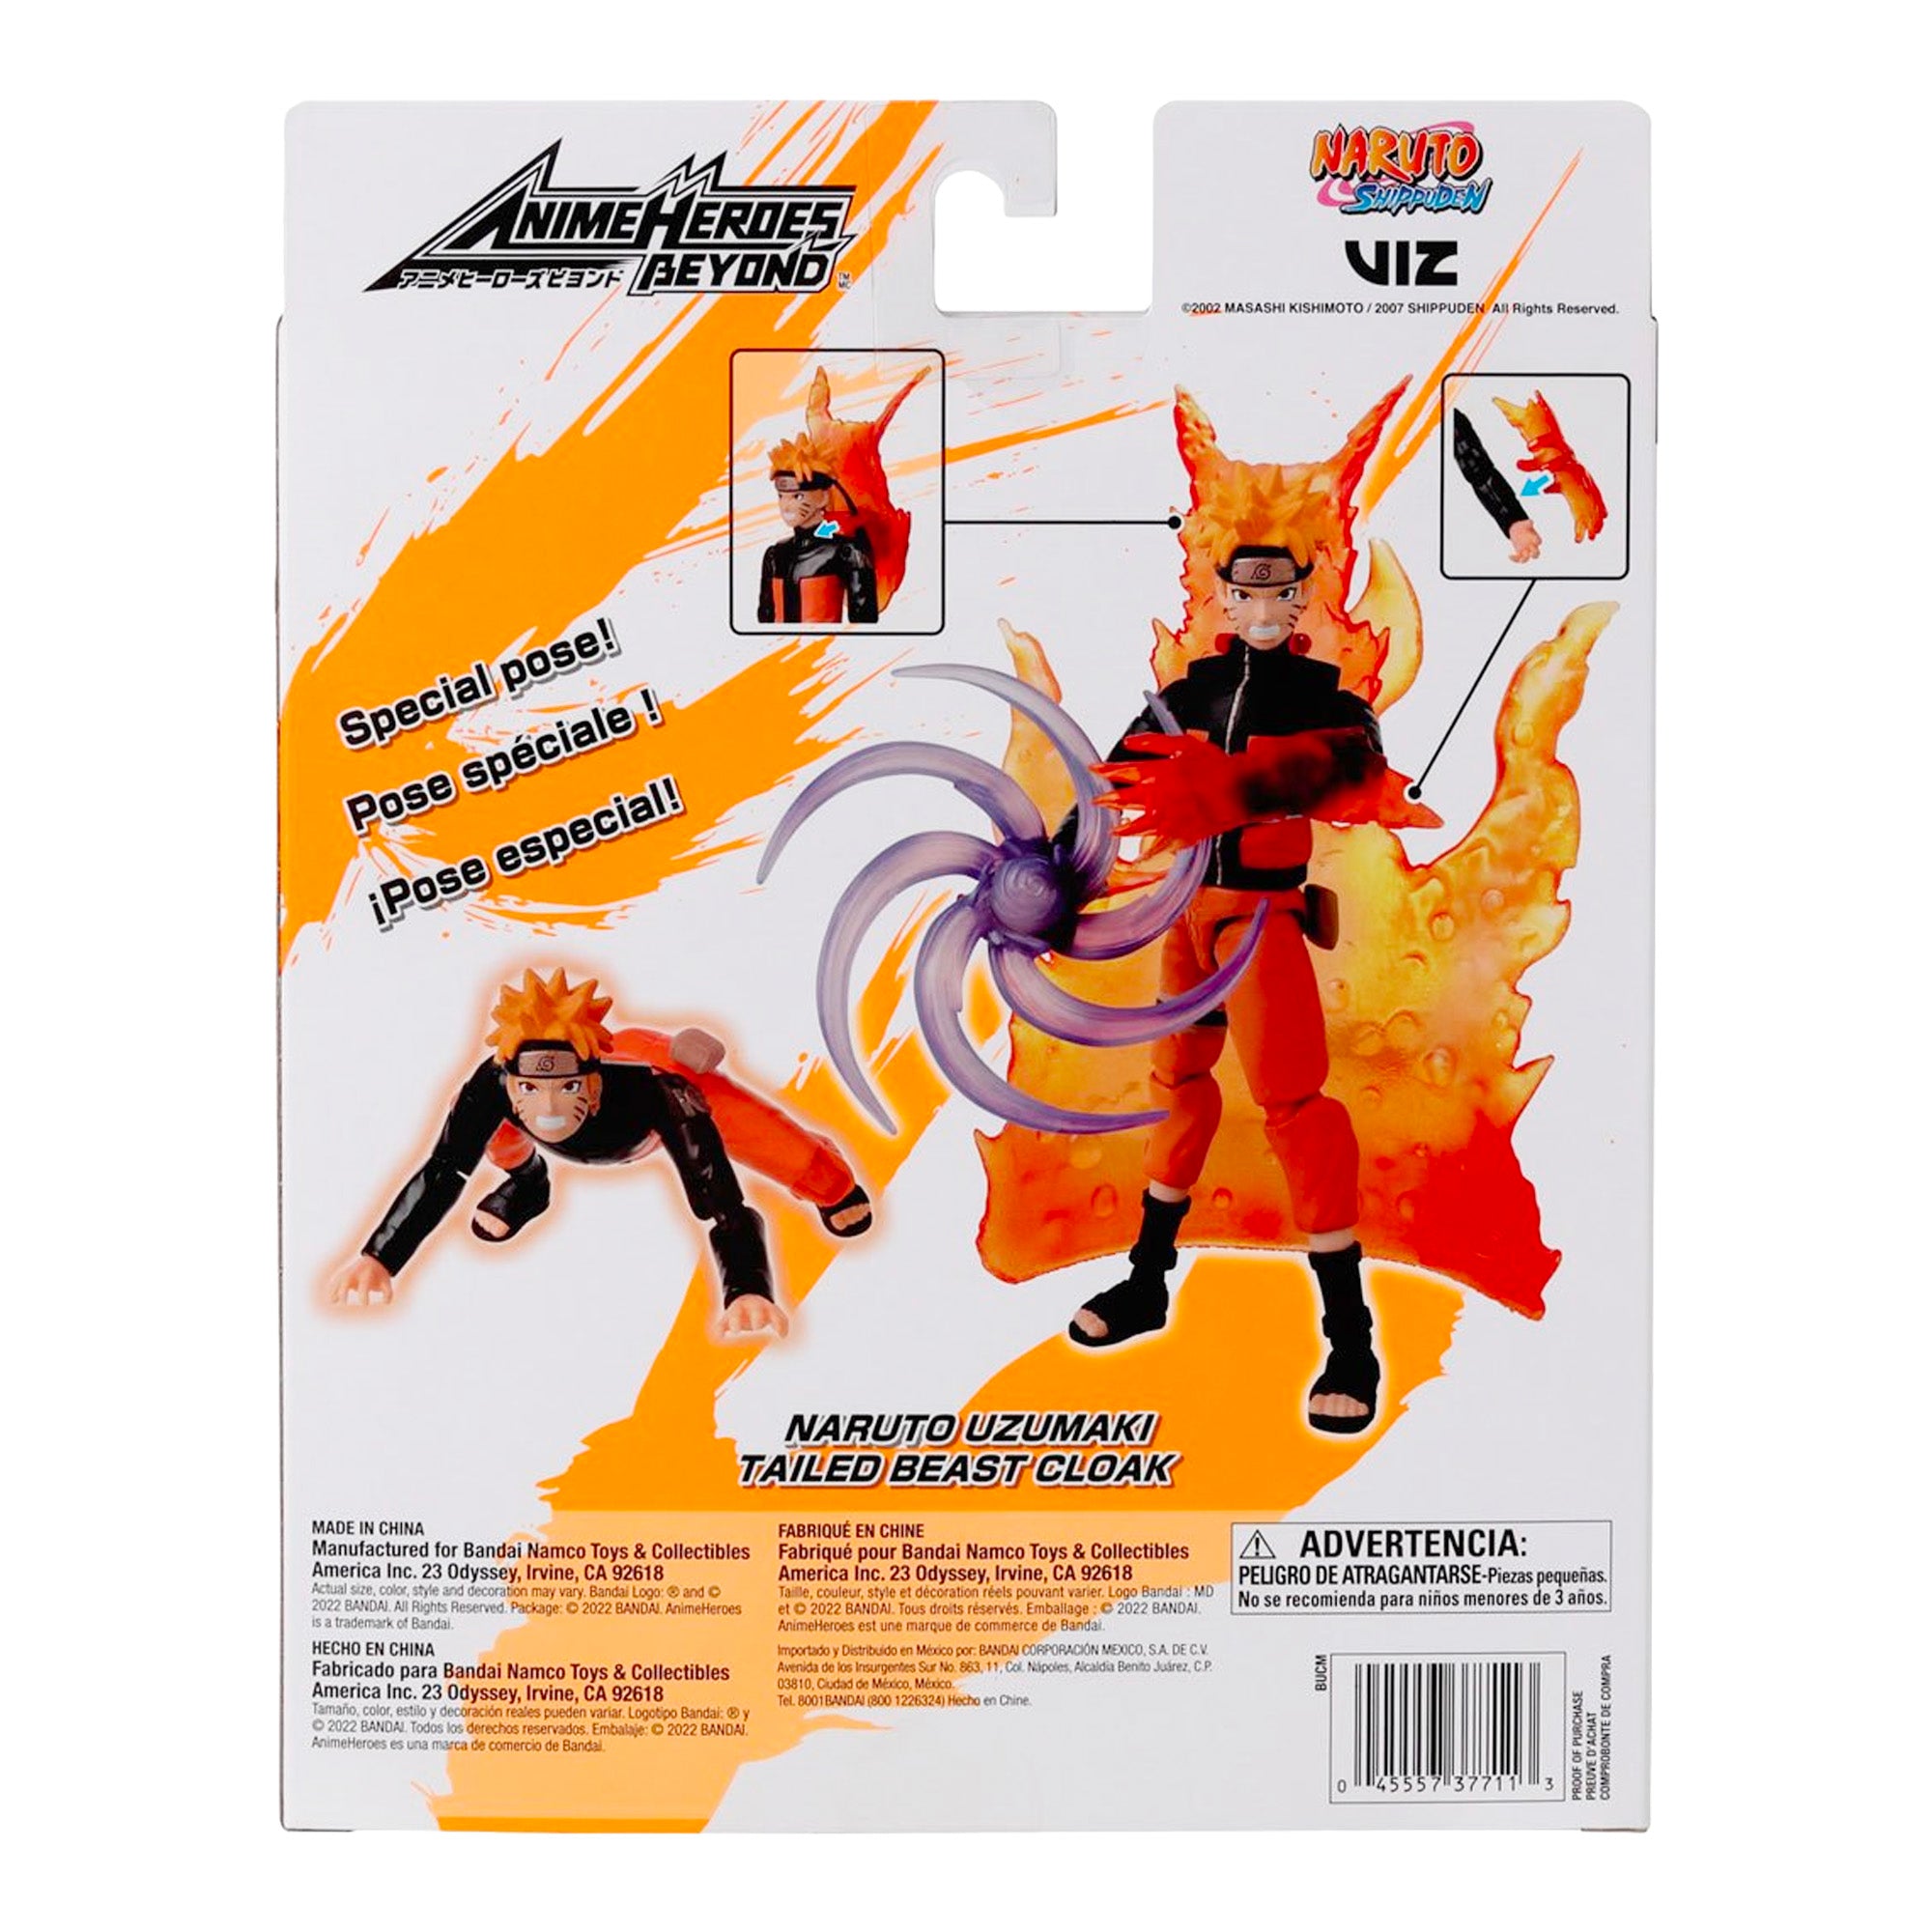 Bandai Anime Heroes Rivals 2 Pack Uzumaki Naruto and Sasuke Uchiha Toy  Action Figure Toy Bundle with 2 My Outlet Mall Stickers - Walmart.com